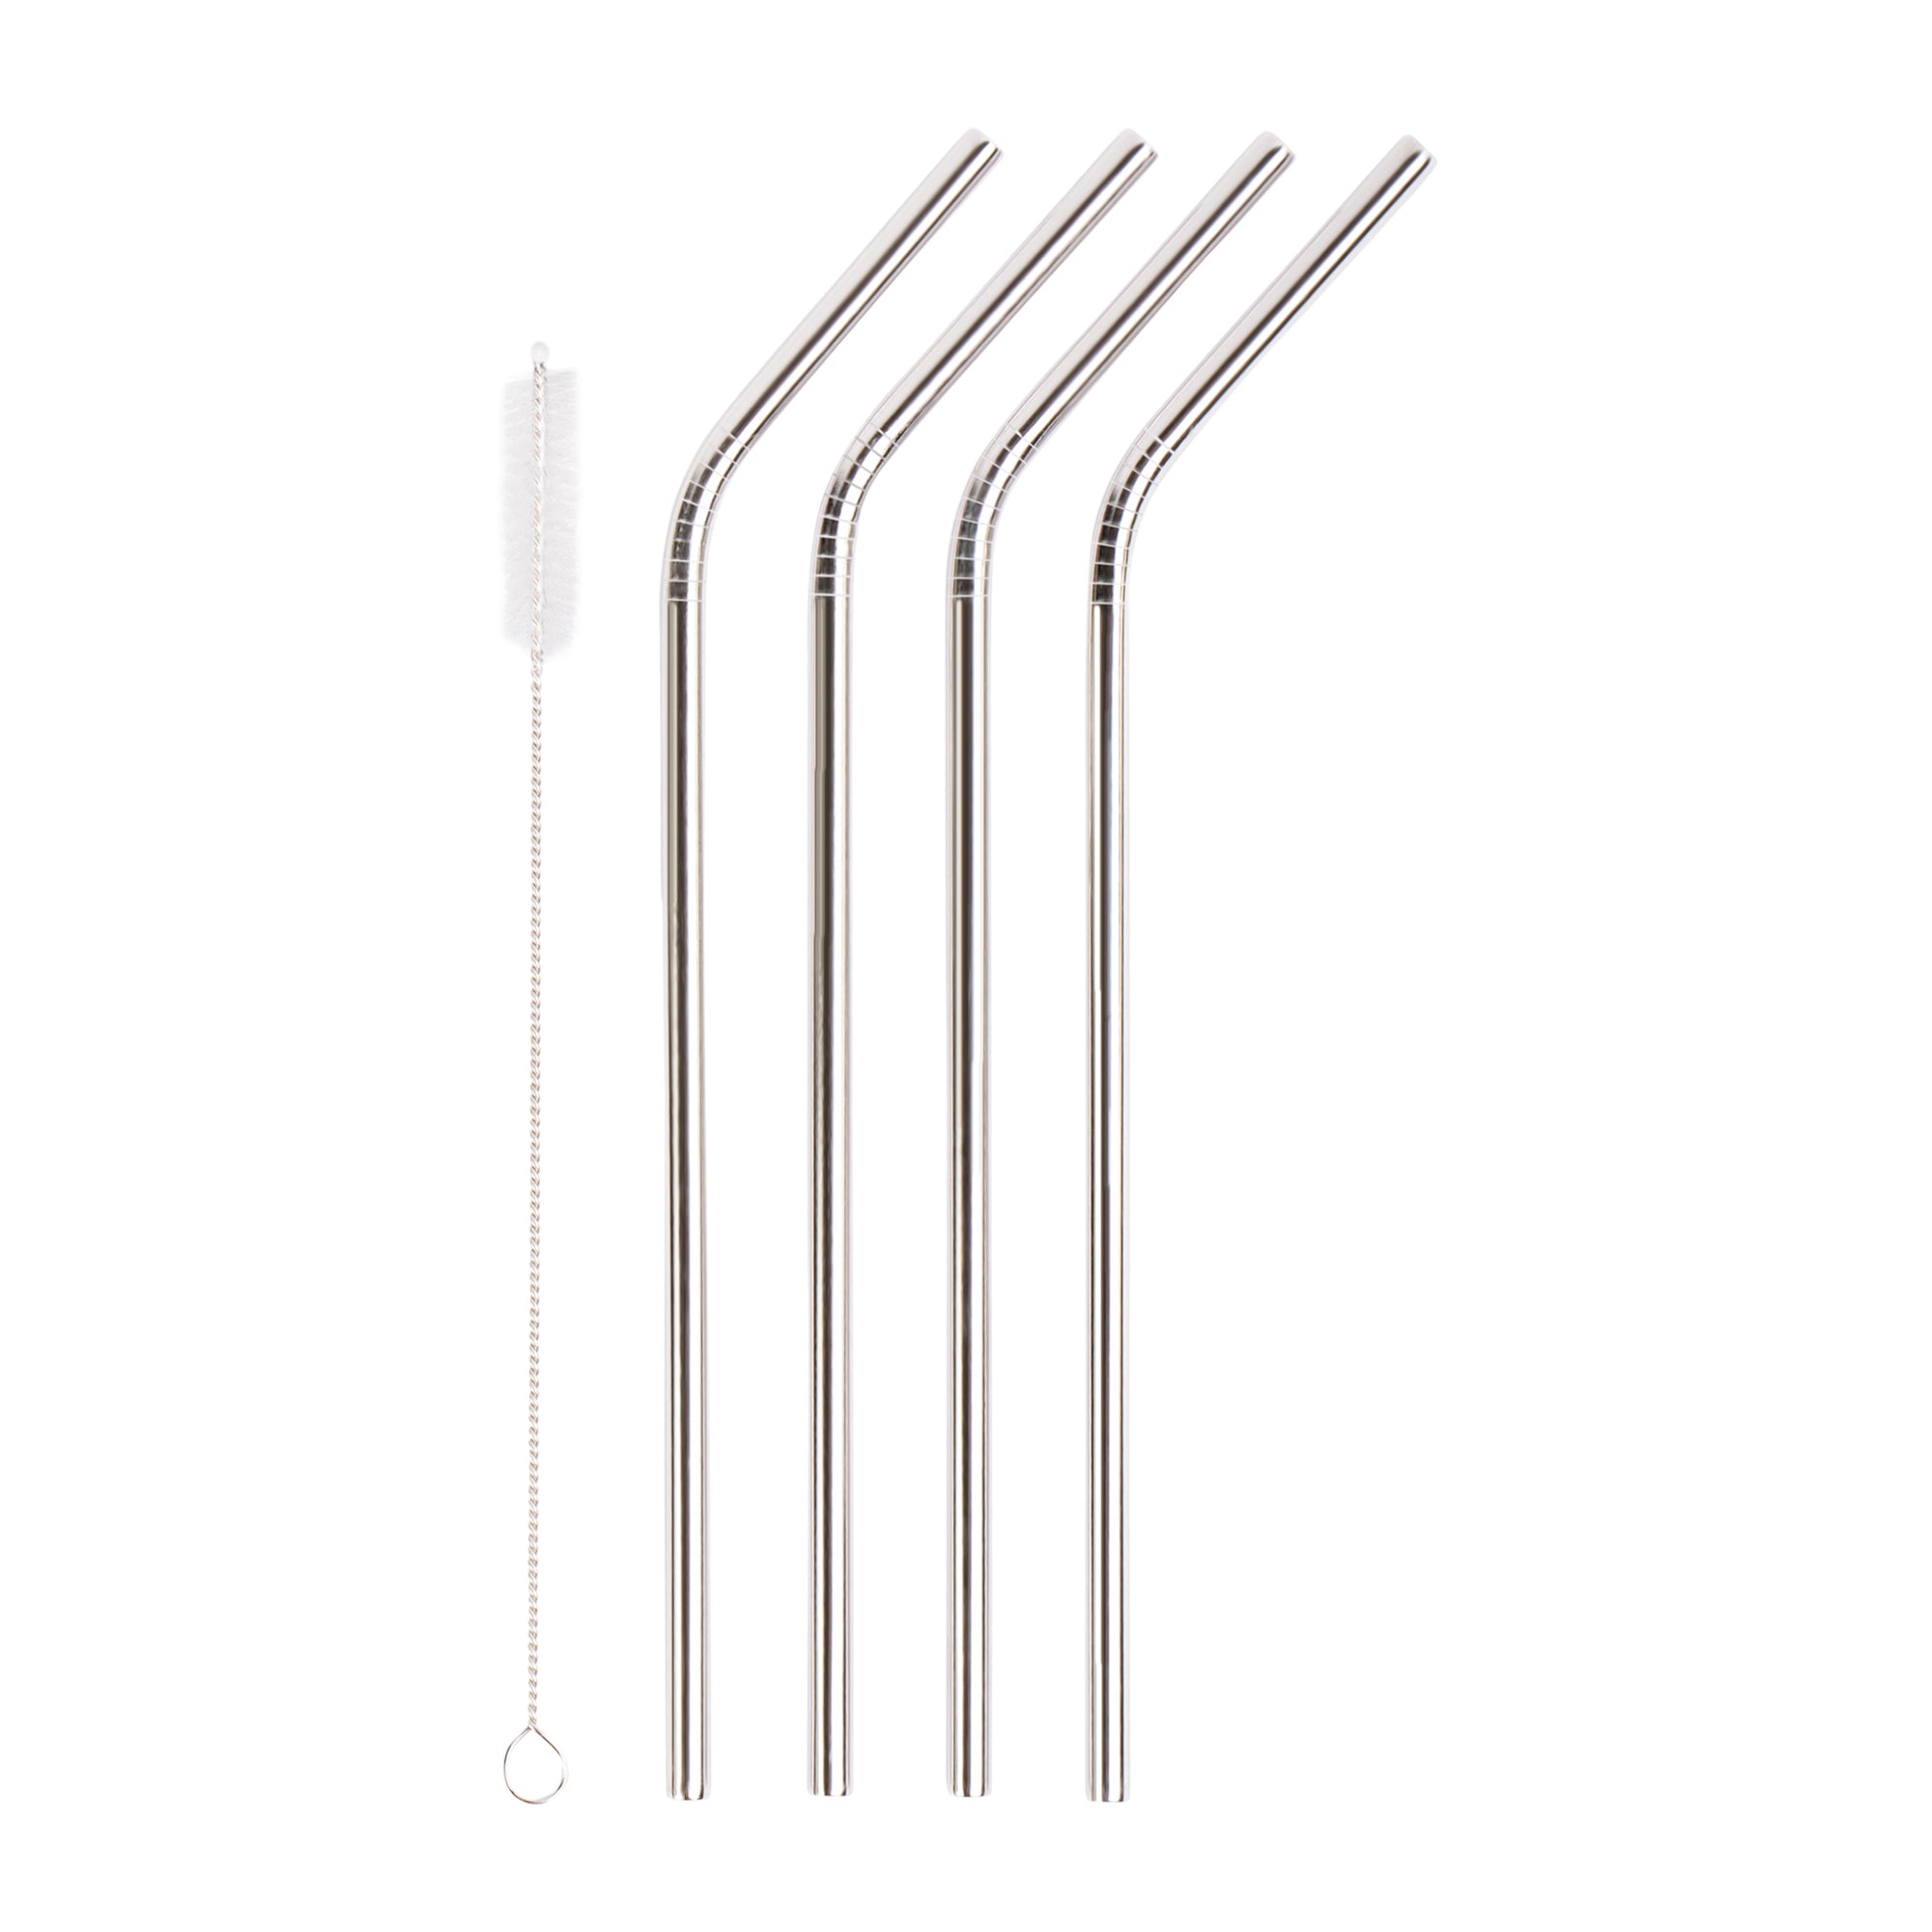 4 Pcs Reusable Metal Drinking Straws 8.5 Inch Stainless Steel Straw 6mm Diameter Wide -Compatible with 20oz Yeti Tumblers Eco-Friendly Washable non-plastic or glass - UNbreakable